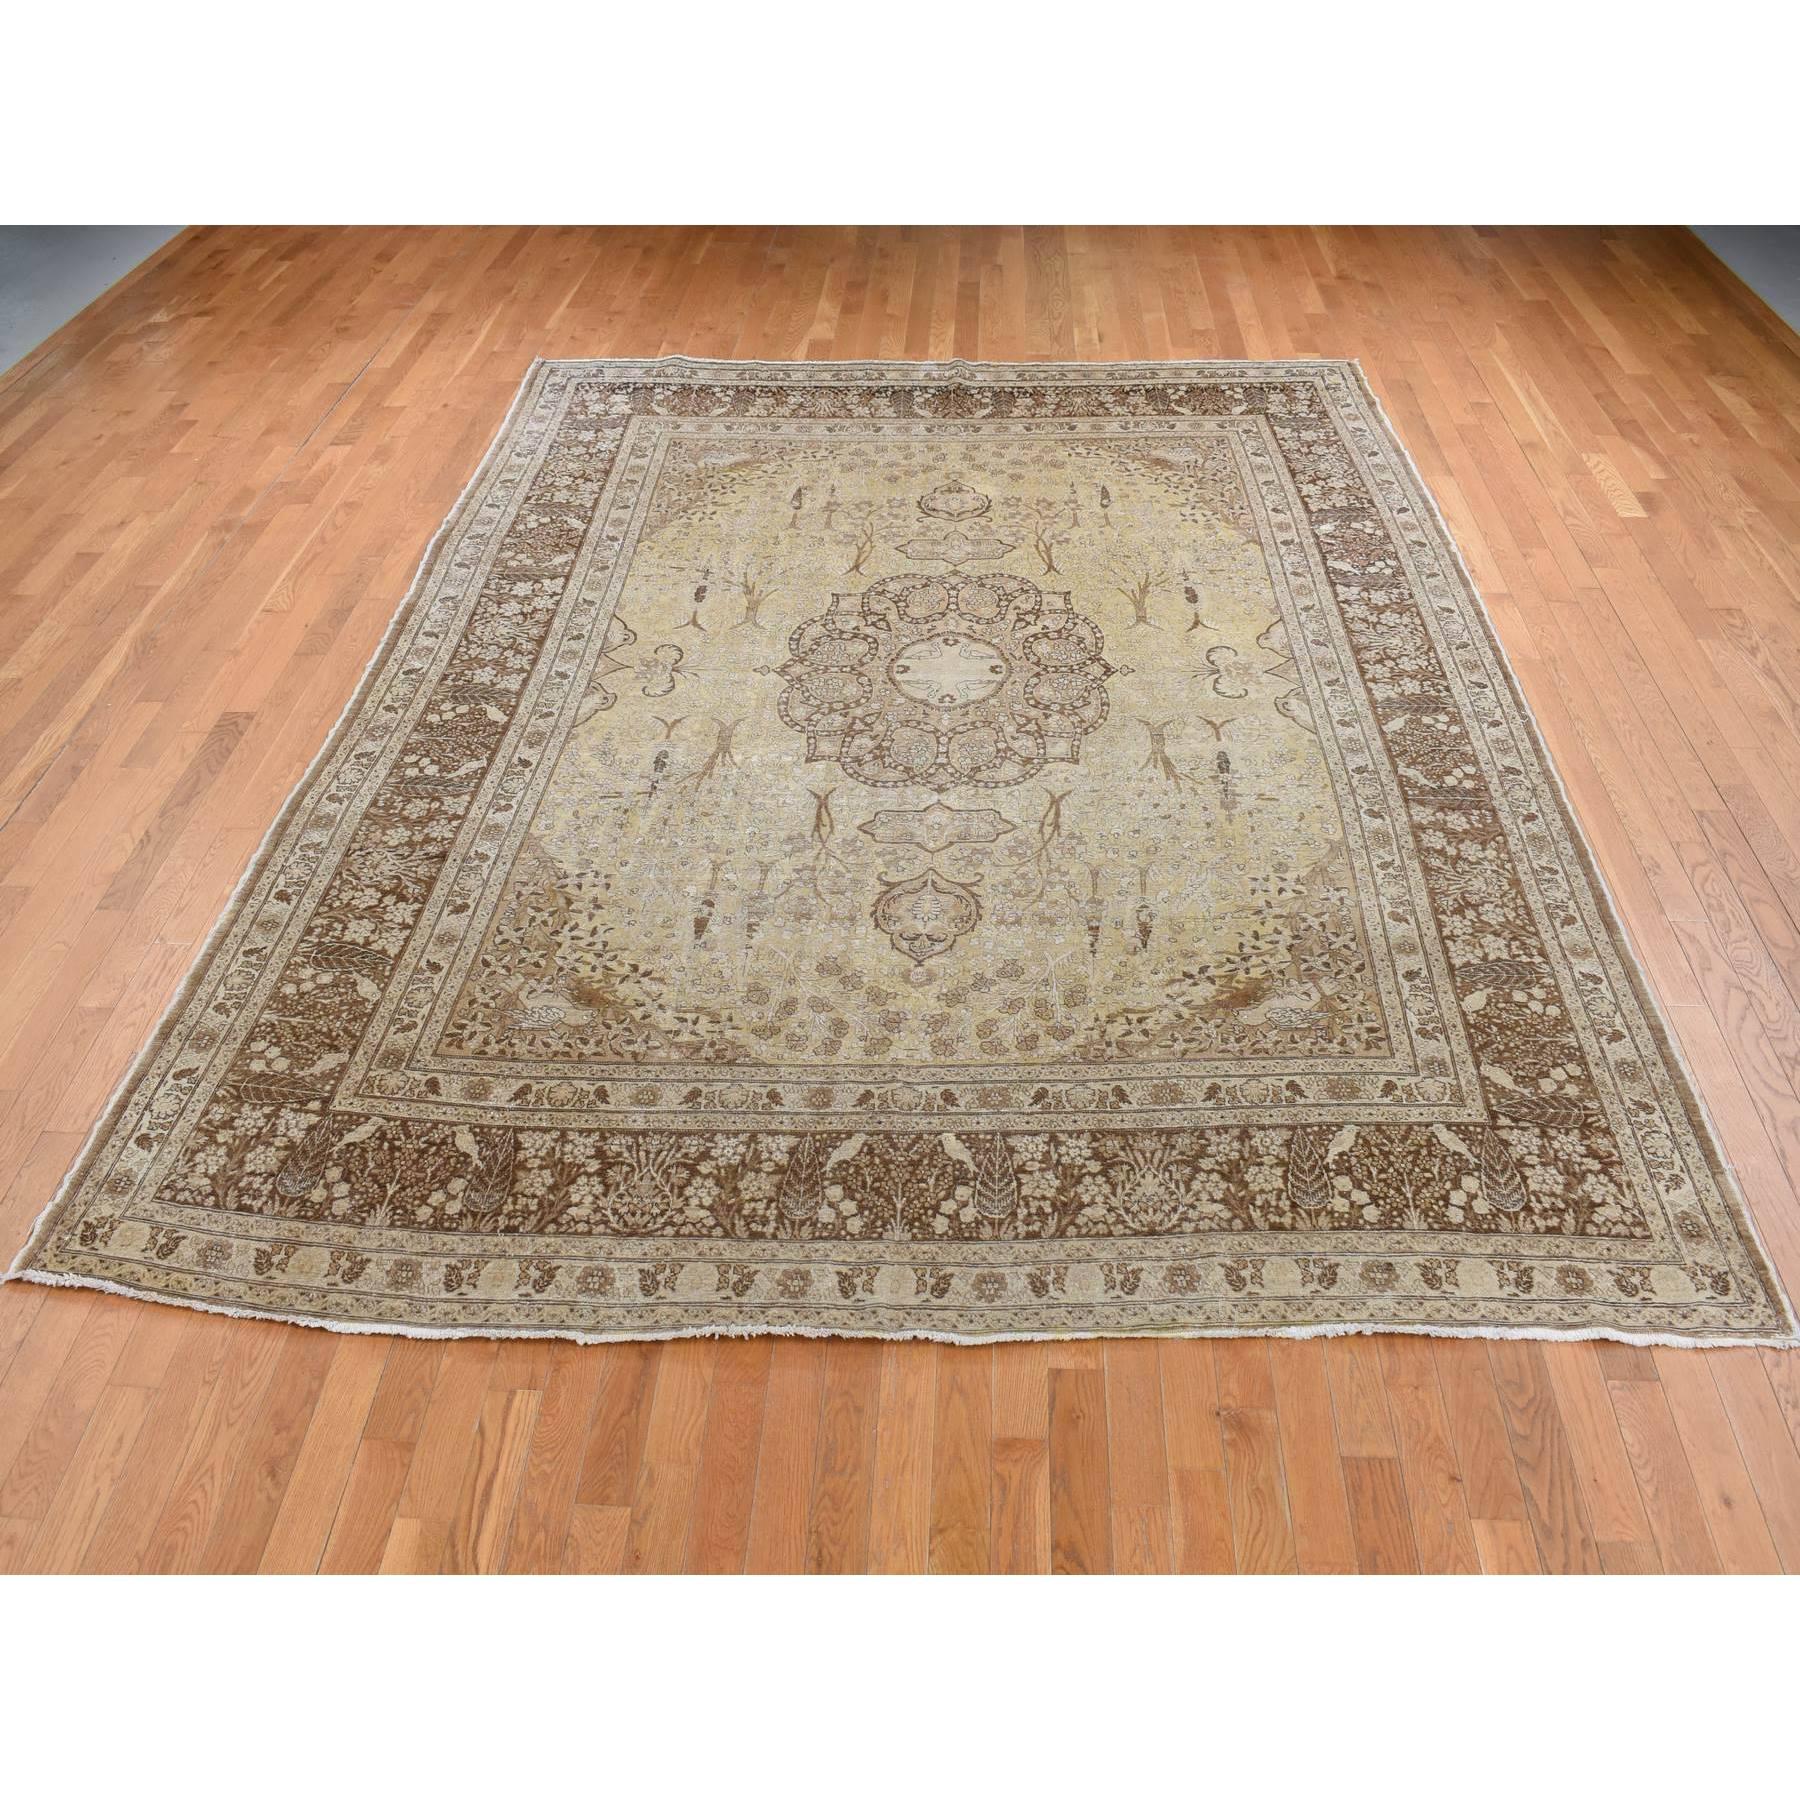 Brown Antique Persian Tabriz Birds and Trees Design Pure Wool Hand Knotted Rug (Mittelalterlich) im Angebot